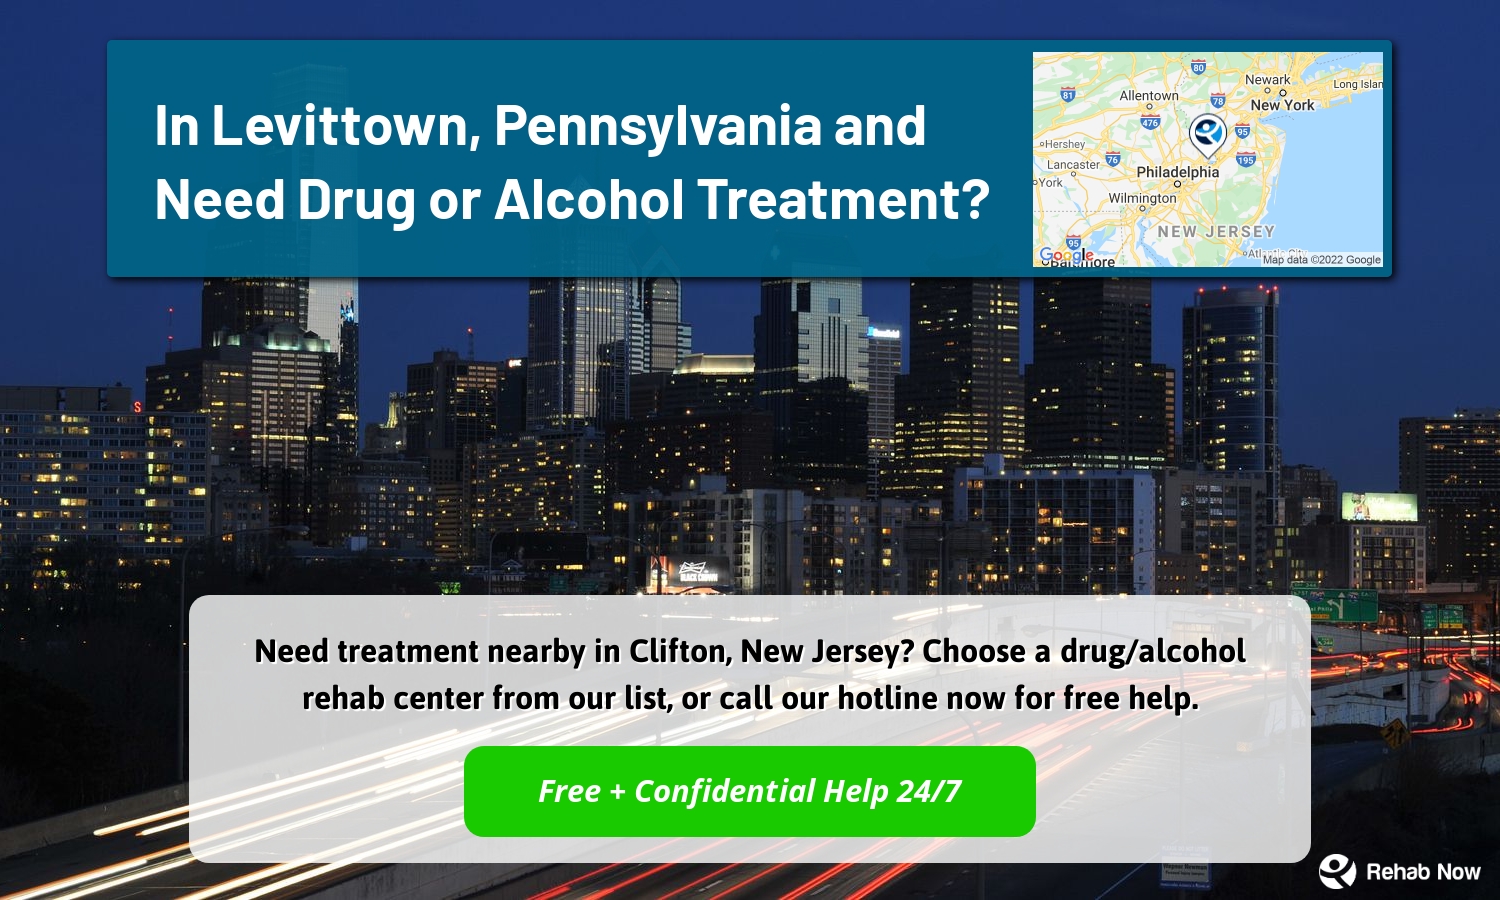 Need treatment nearby in Clifton, New Jersey? Choose a drug/alcohol rehab center from our list, or call our hotline now for free help.